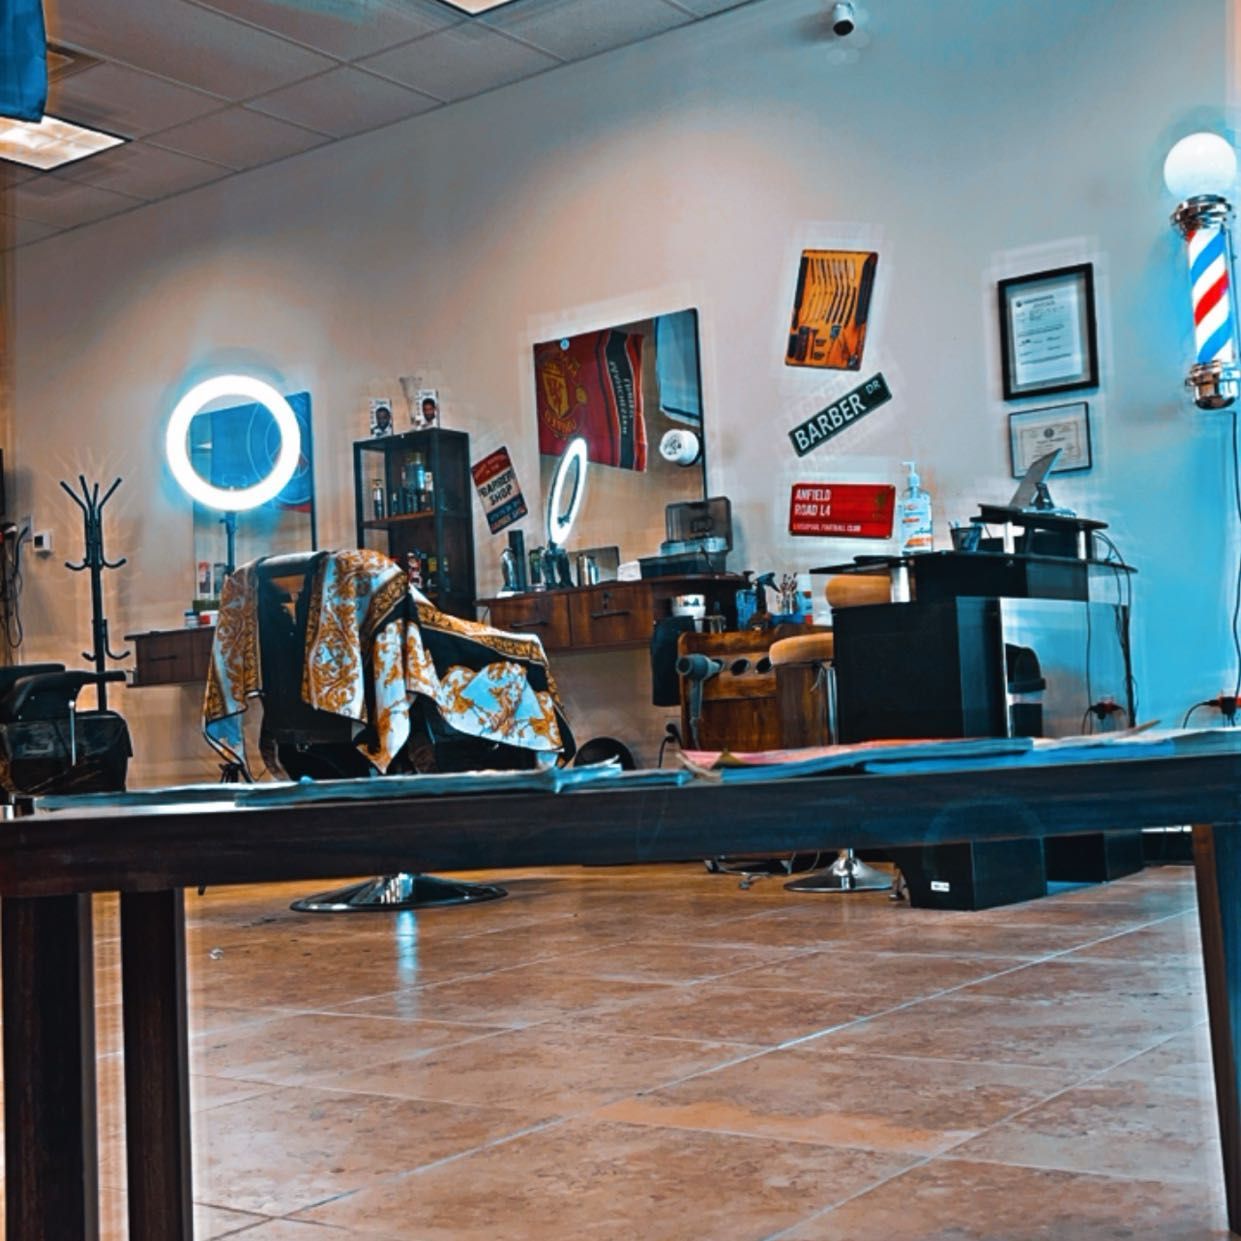 House of haircuts, 15003 FM 529 Rd, Houston, 77095